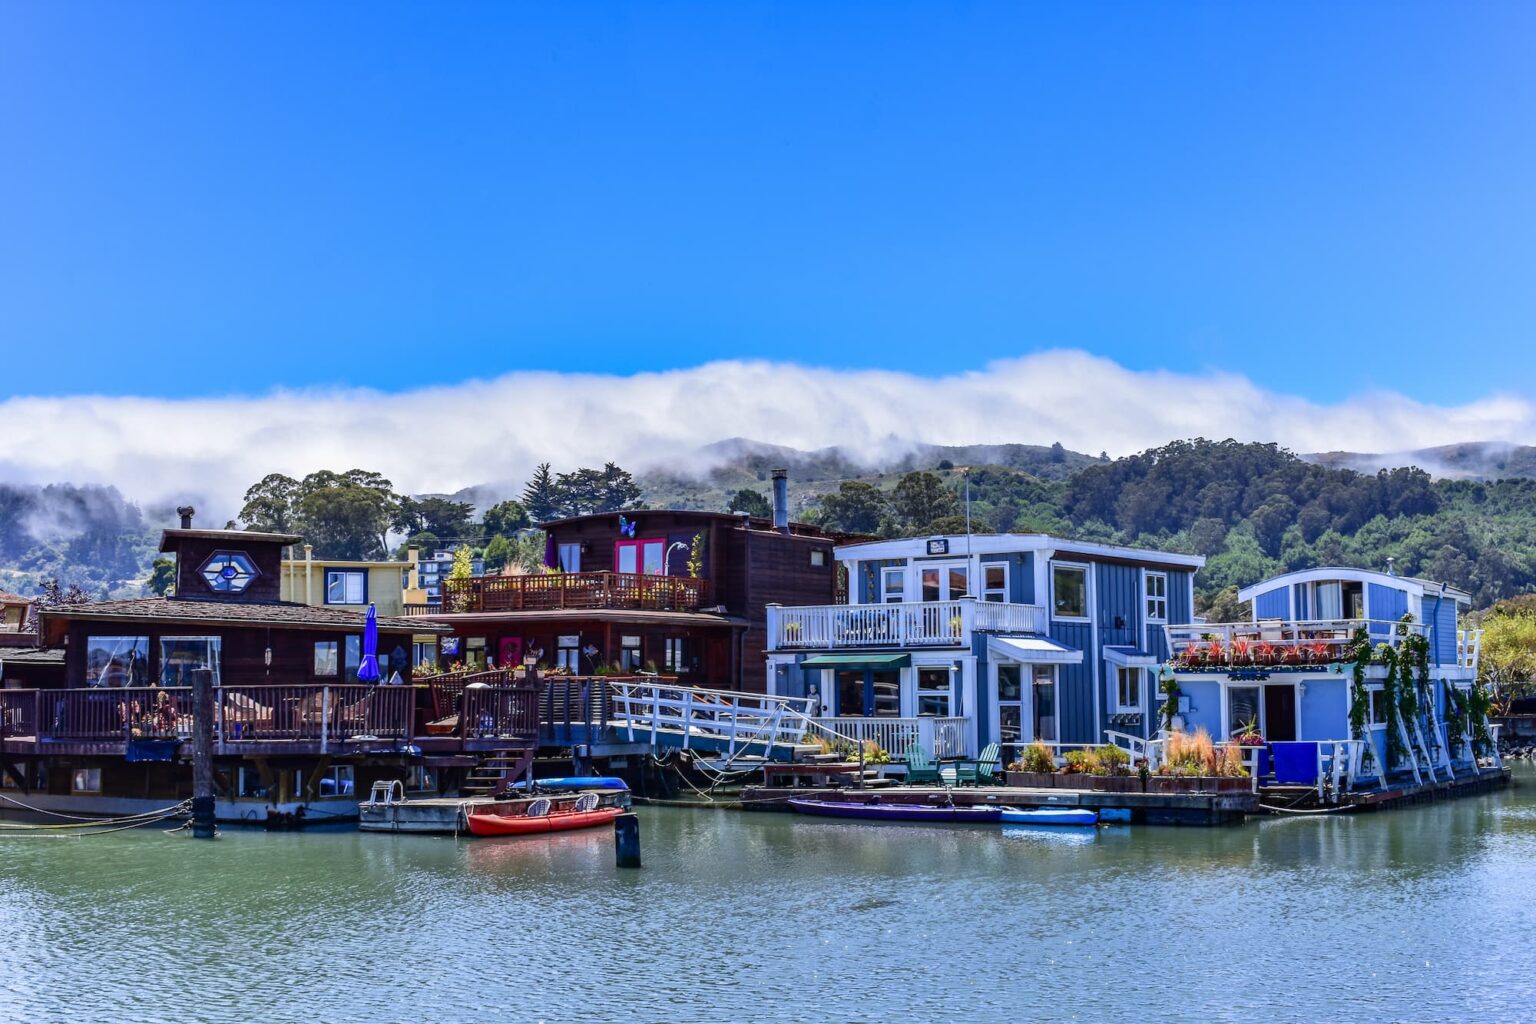 Colorful-house-boats-floating-on-water-on-a-sunny-day-in-Sausalito-San-Francisco-bay-USA.jpg